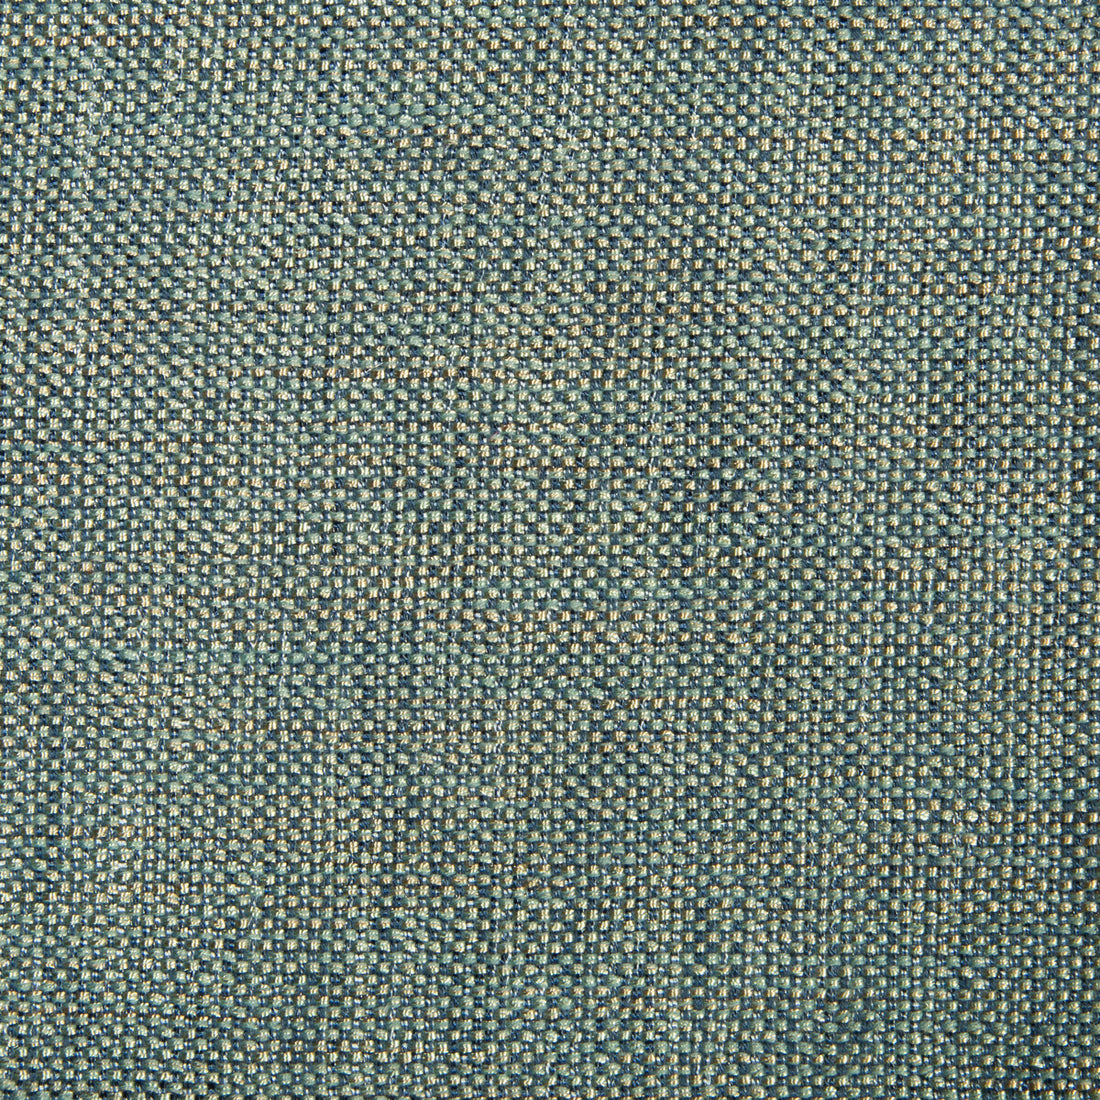 Kravet Contract fabric in 4458-515 color - pattern 4458.515.0 - by Kravet Contract